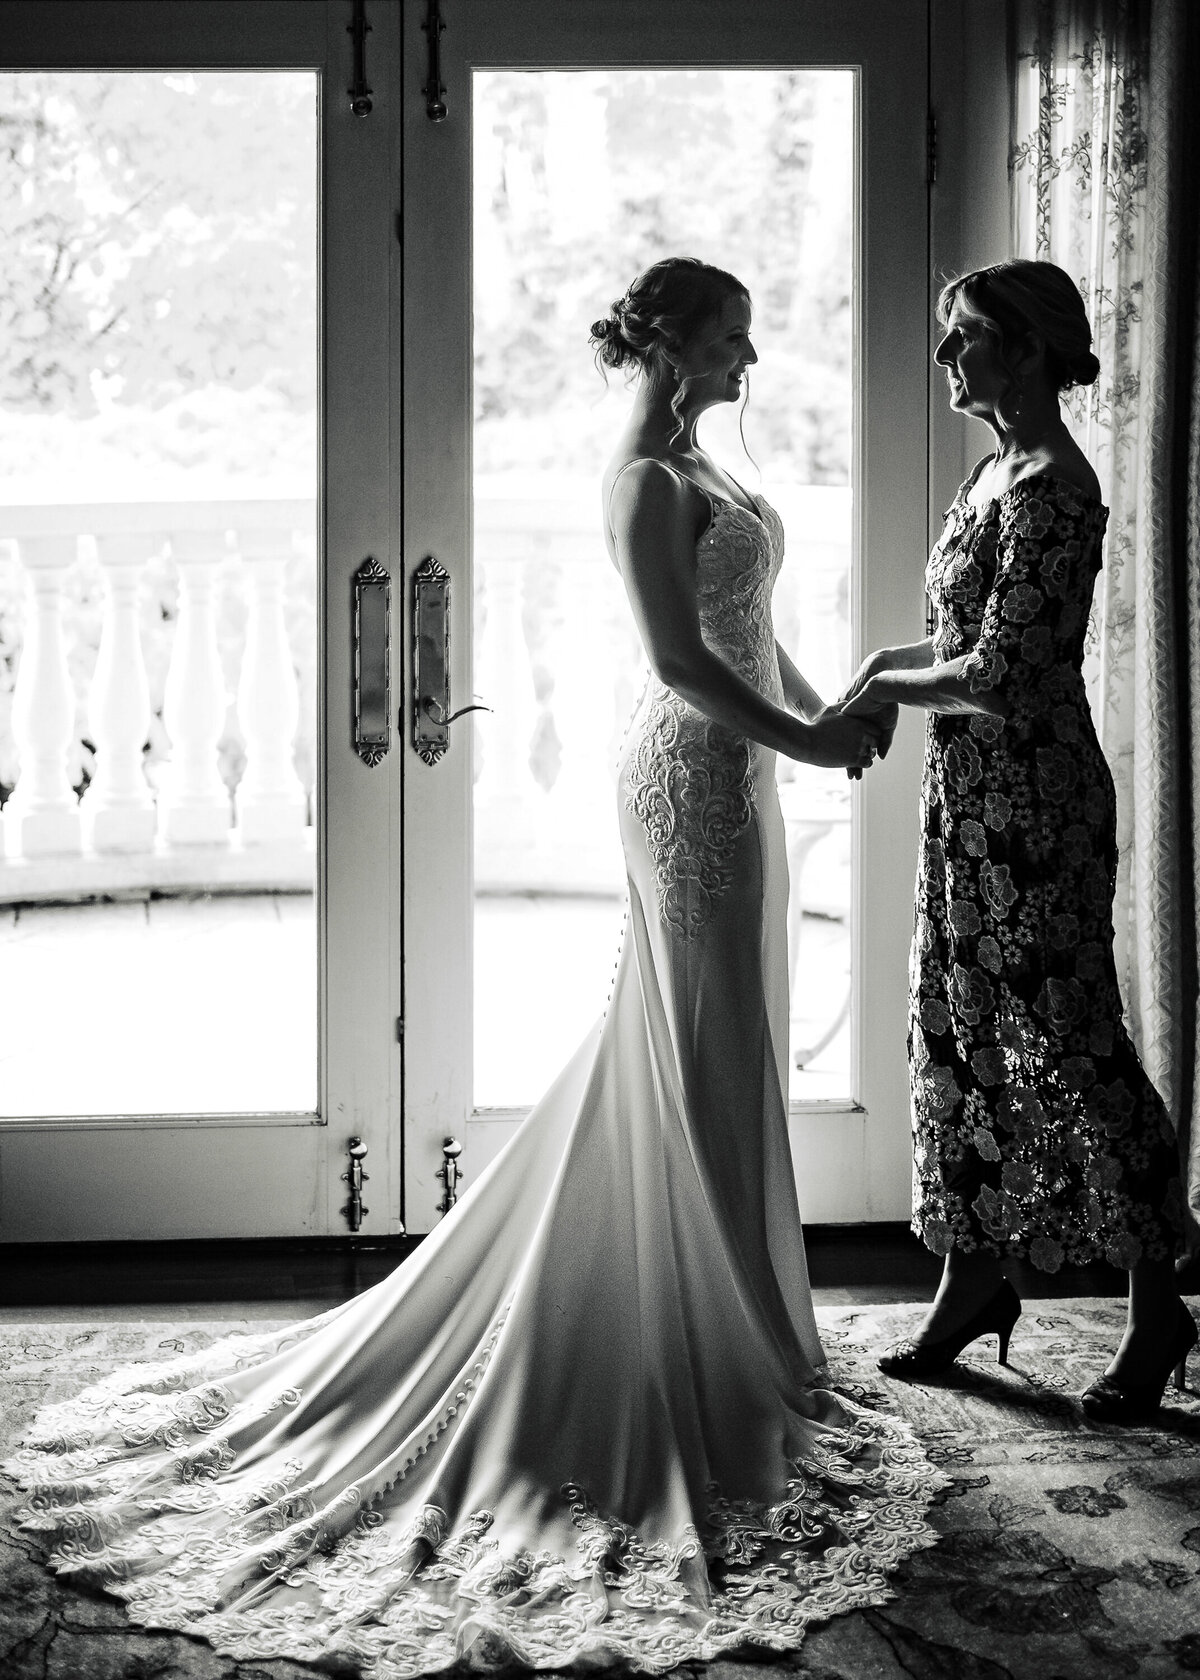 Find inspiring wedding photos from Westmount Country Club by Ishan Fotografi.